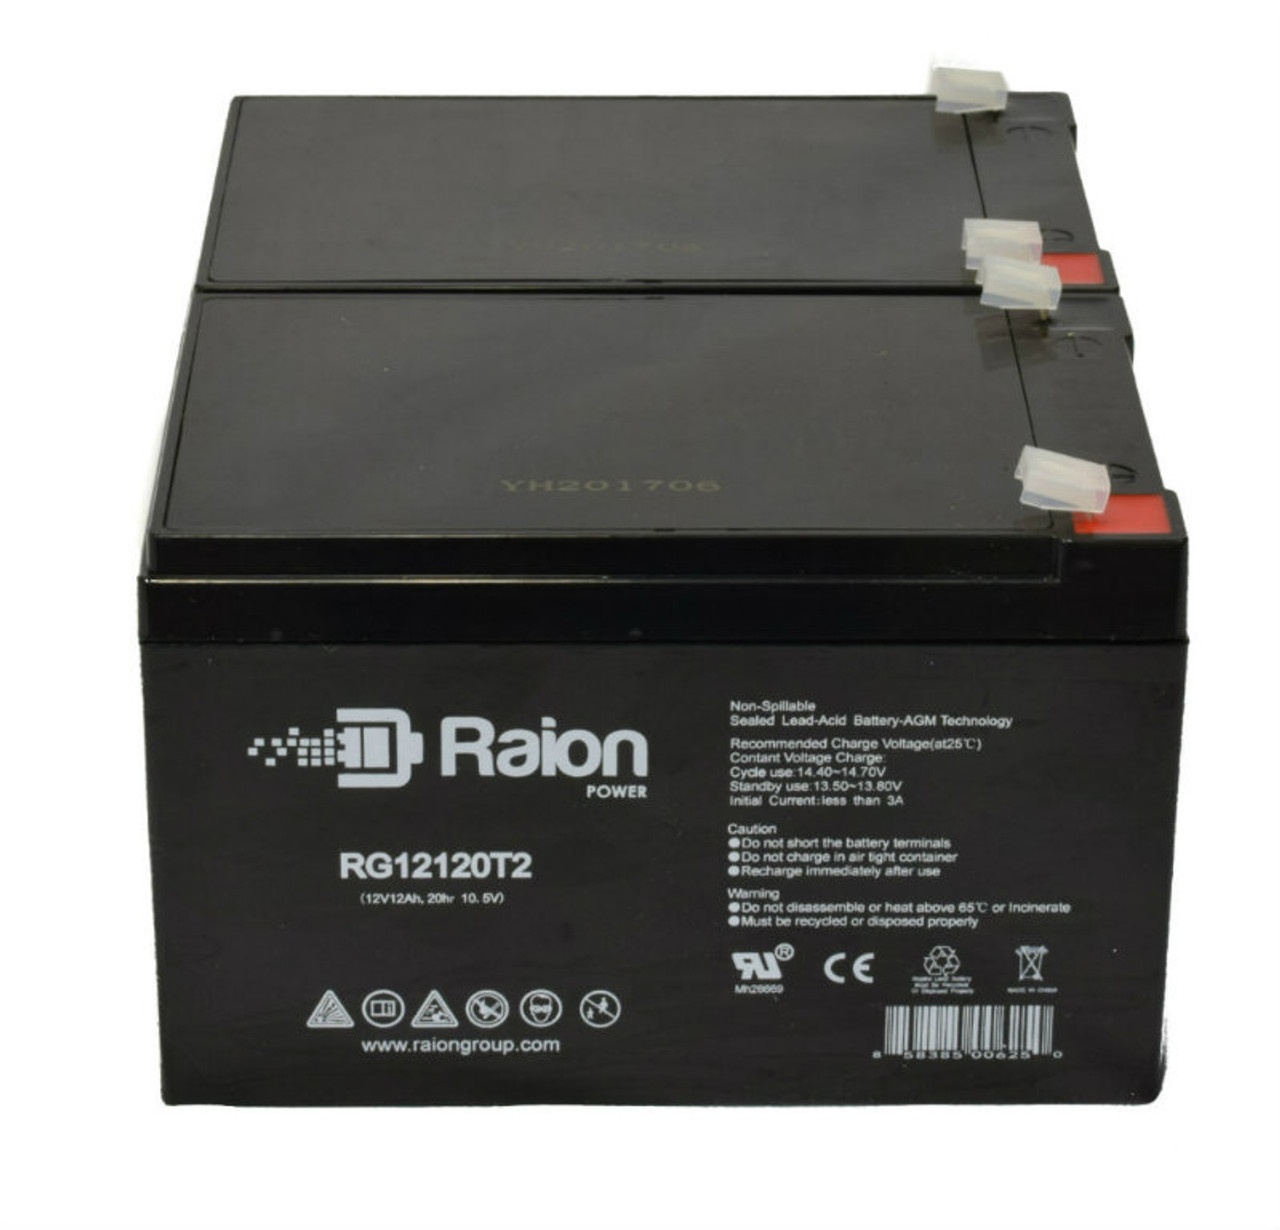 Raion Power 12V 12Ah Non-Spillable Compatible Replacement Battery for SES BT12-12 - (2 Pack)